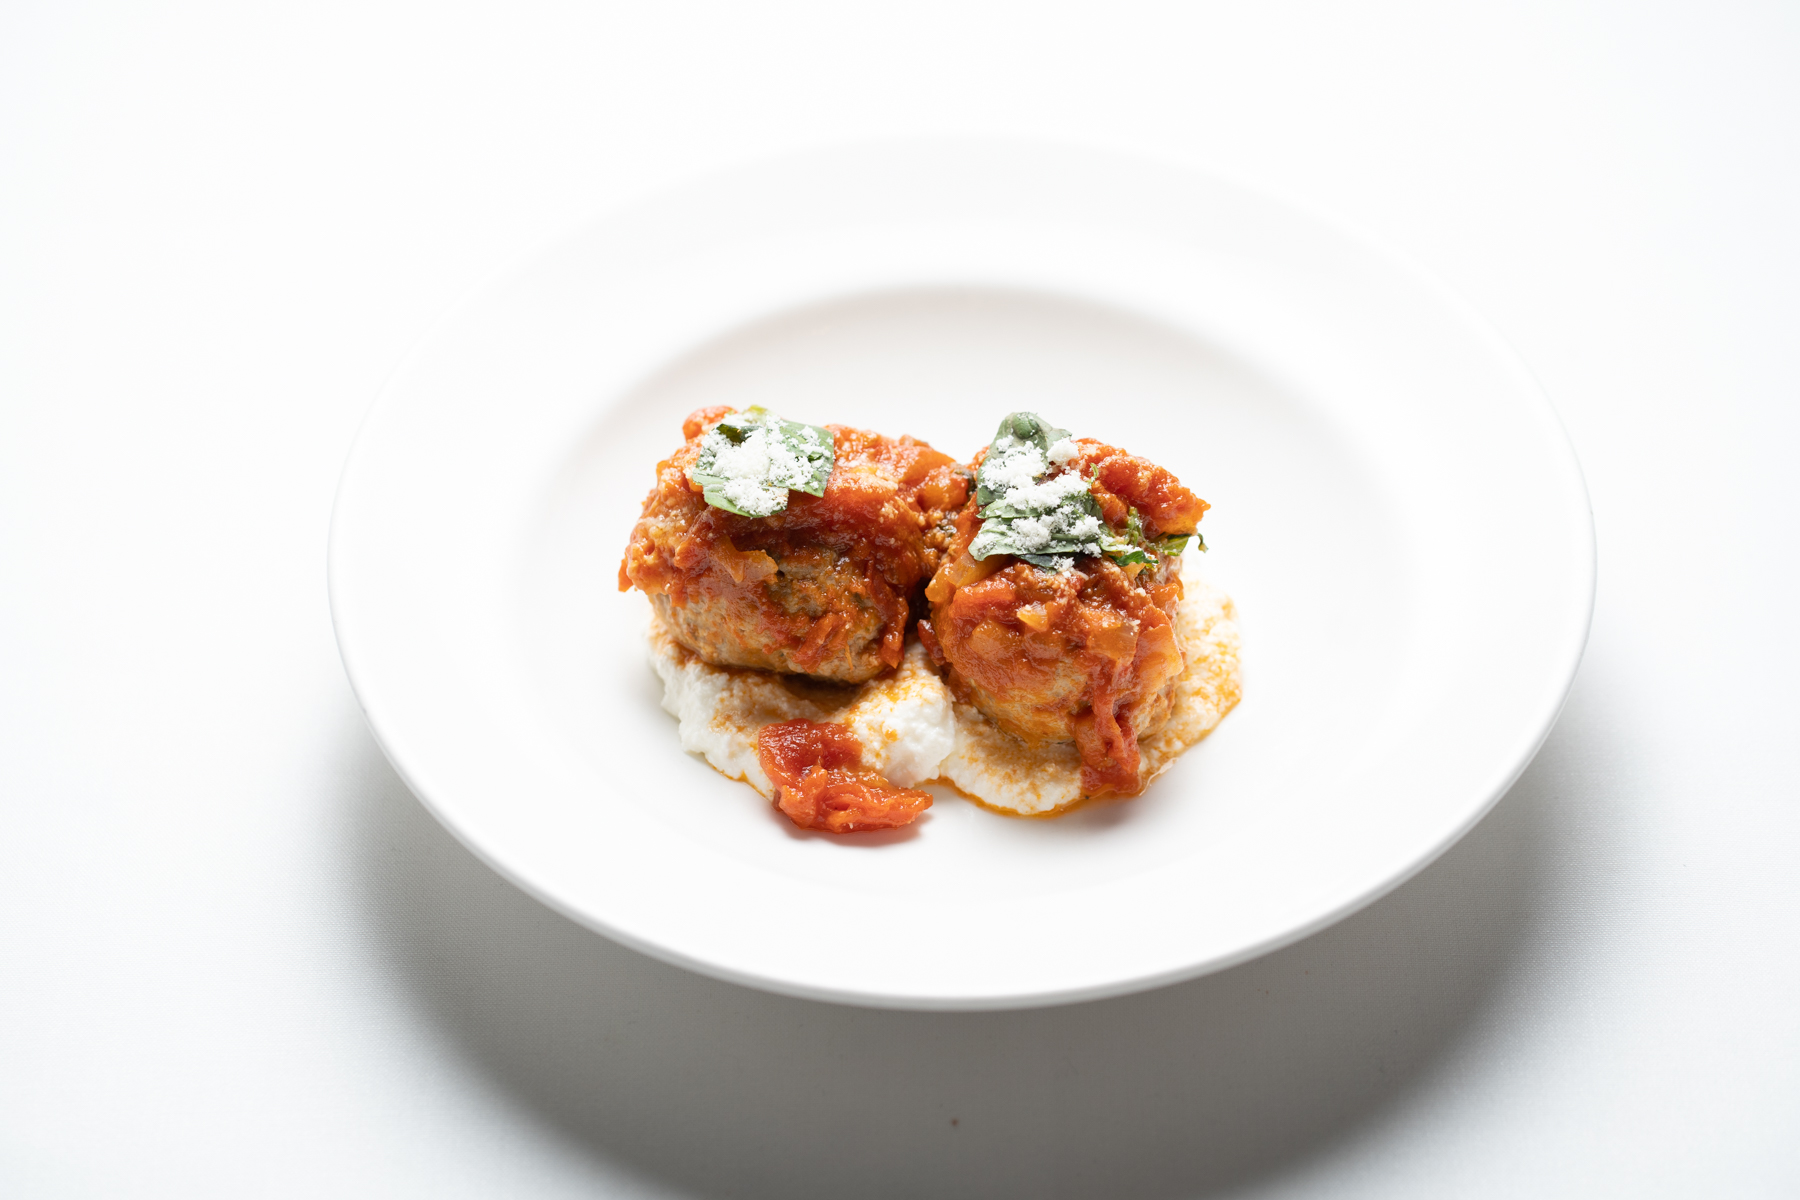 The Polpette with Parmigiano and Basil from the new Happy Hour menu at Il Mulino New York in Boca Raton. (Il Mulino New York/Courtesy)